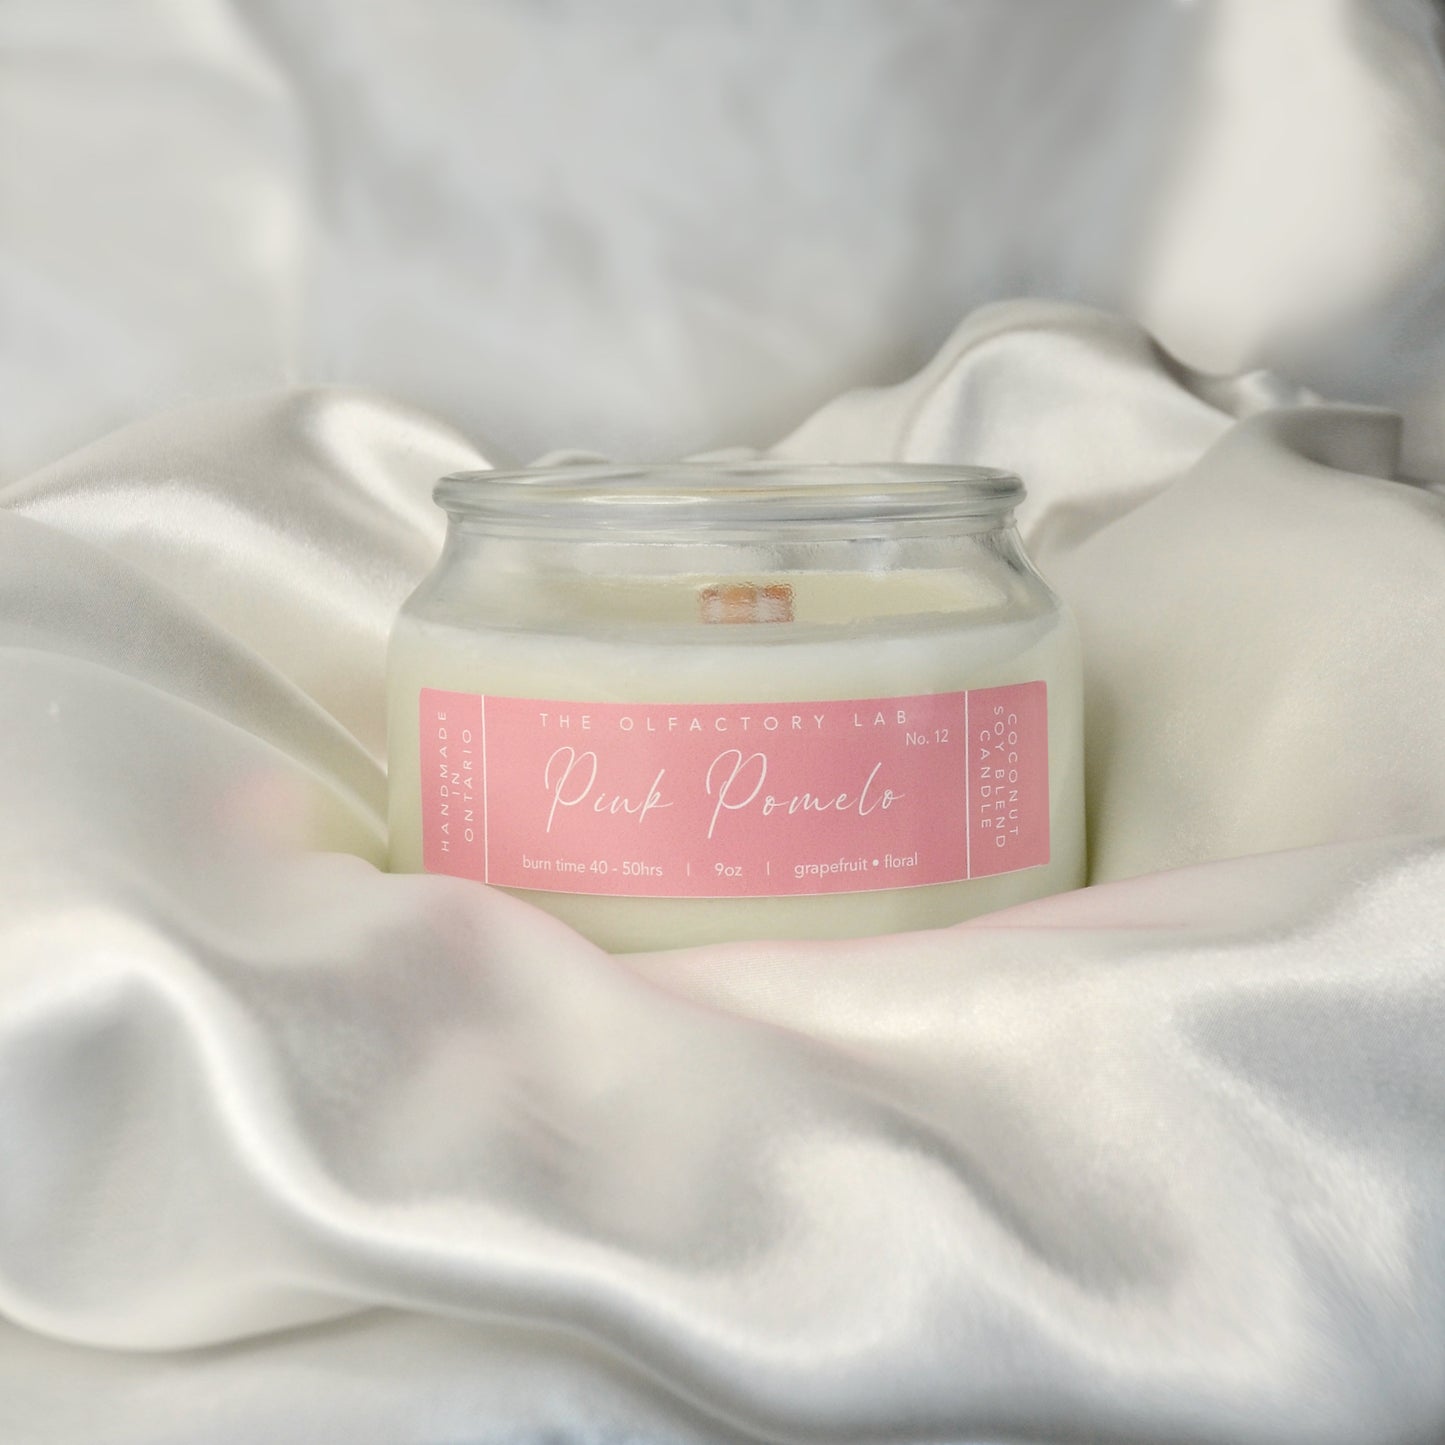 9oz white candle. Candle is laying on a white silk pillow. Candle label is a rectangle shape in a soft pink with white cursive font reading Pink Pomelo.